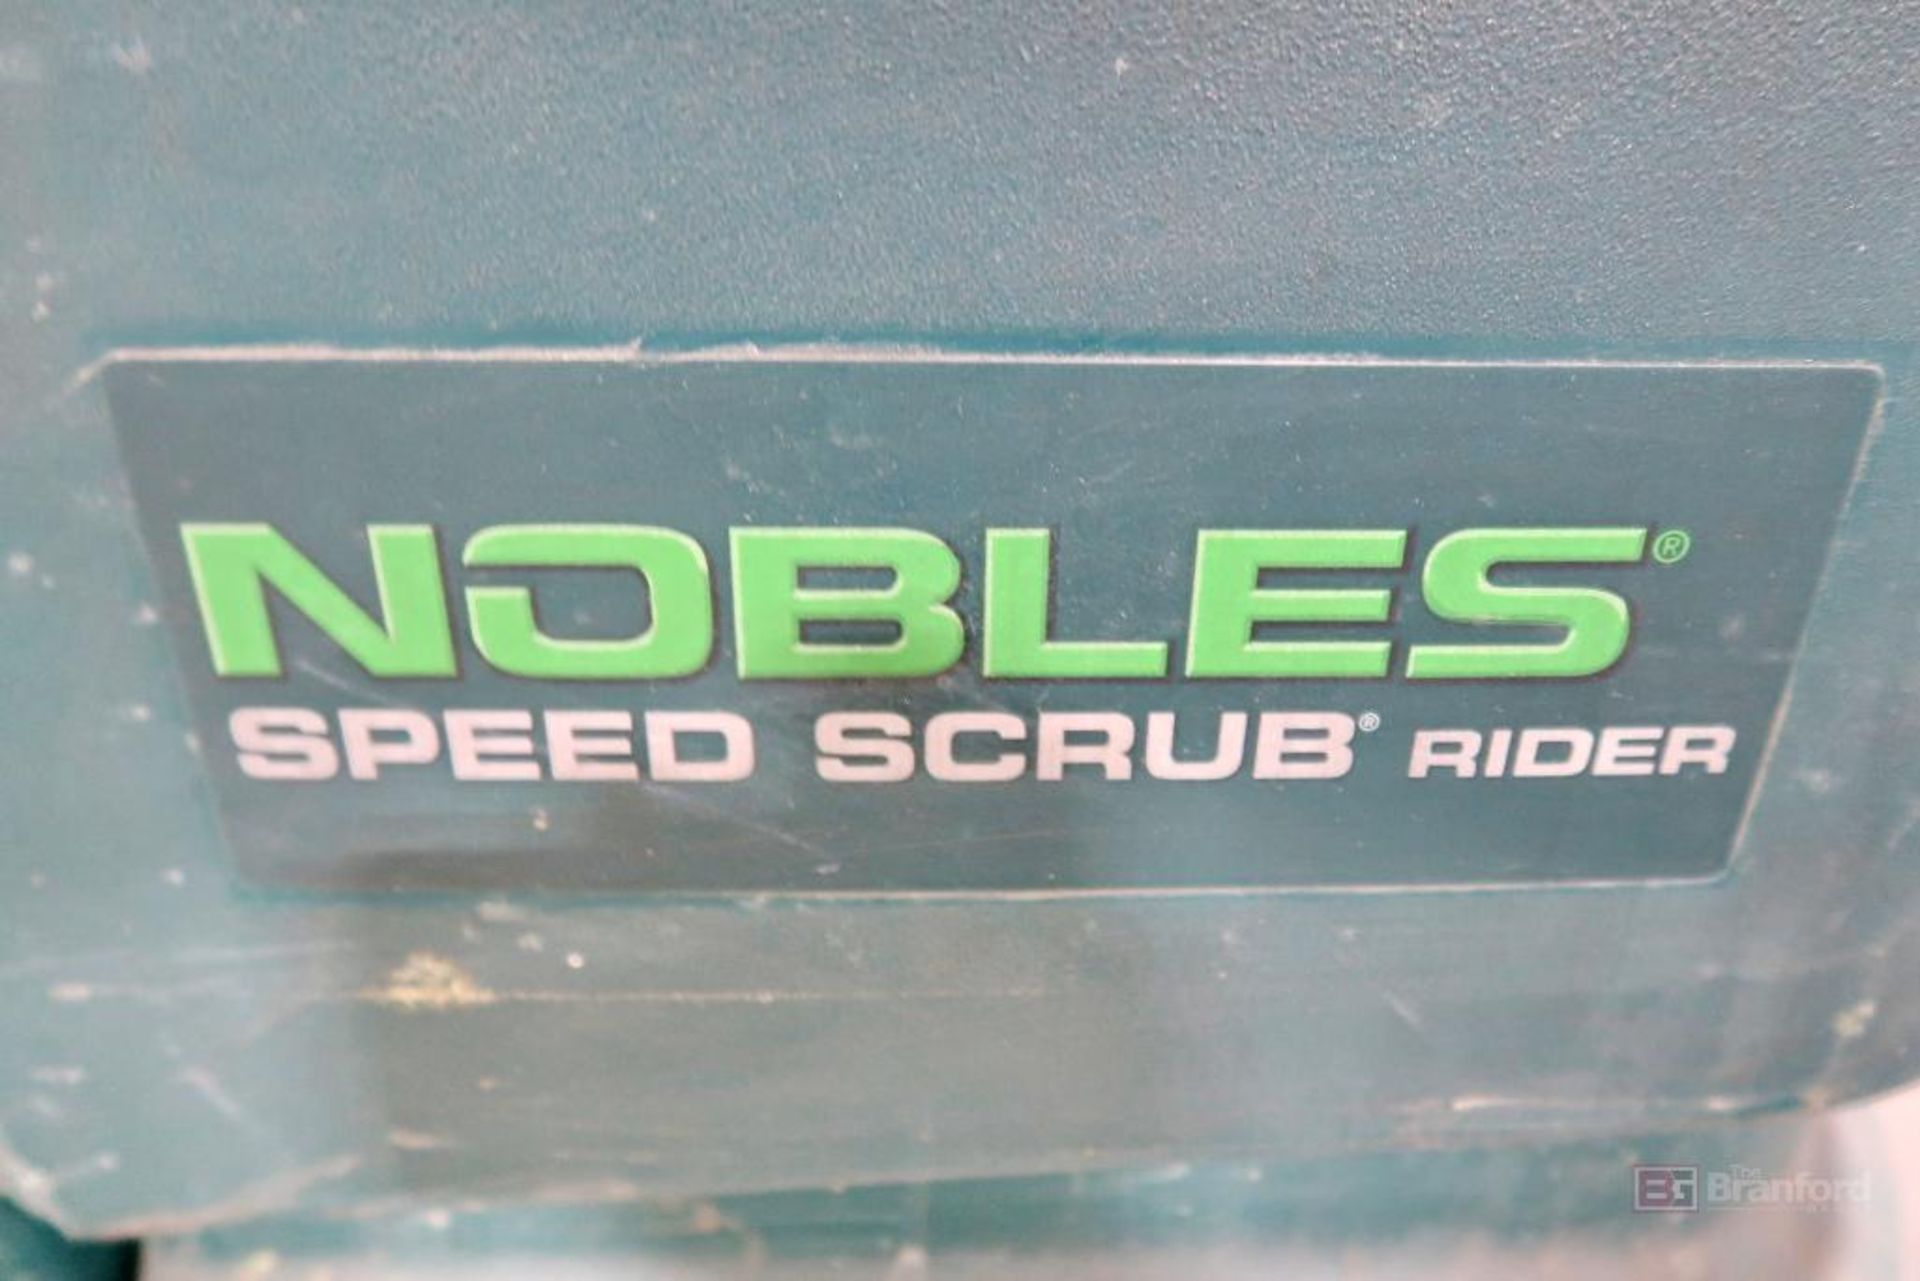 Nobles Speed Scrub Ride-On Floor Cleaner - Image 2 of 6